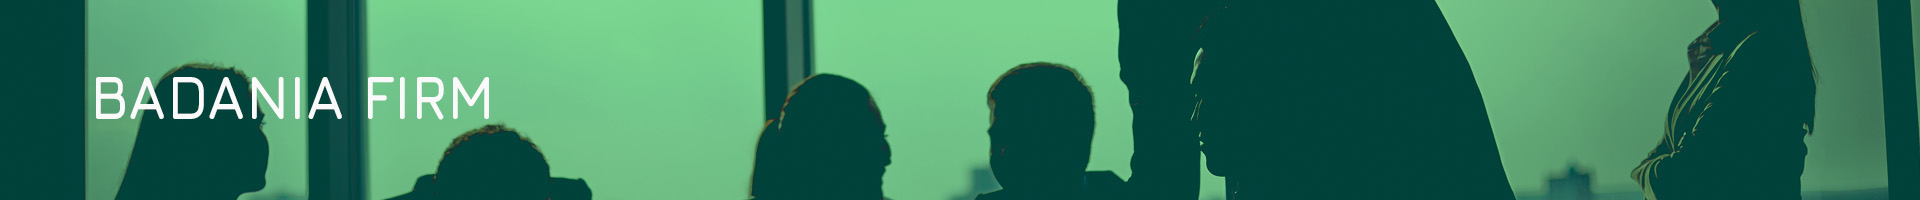 About-banner